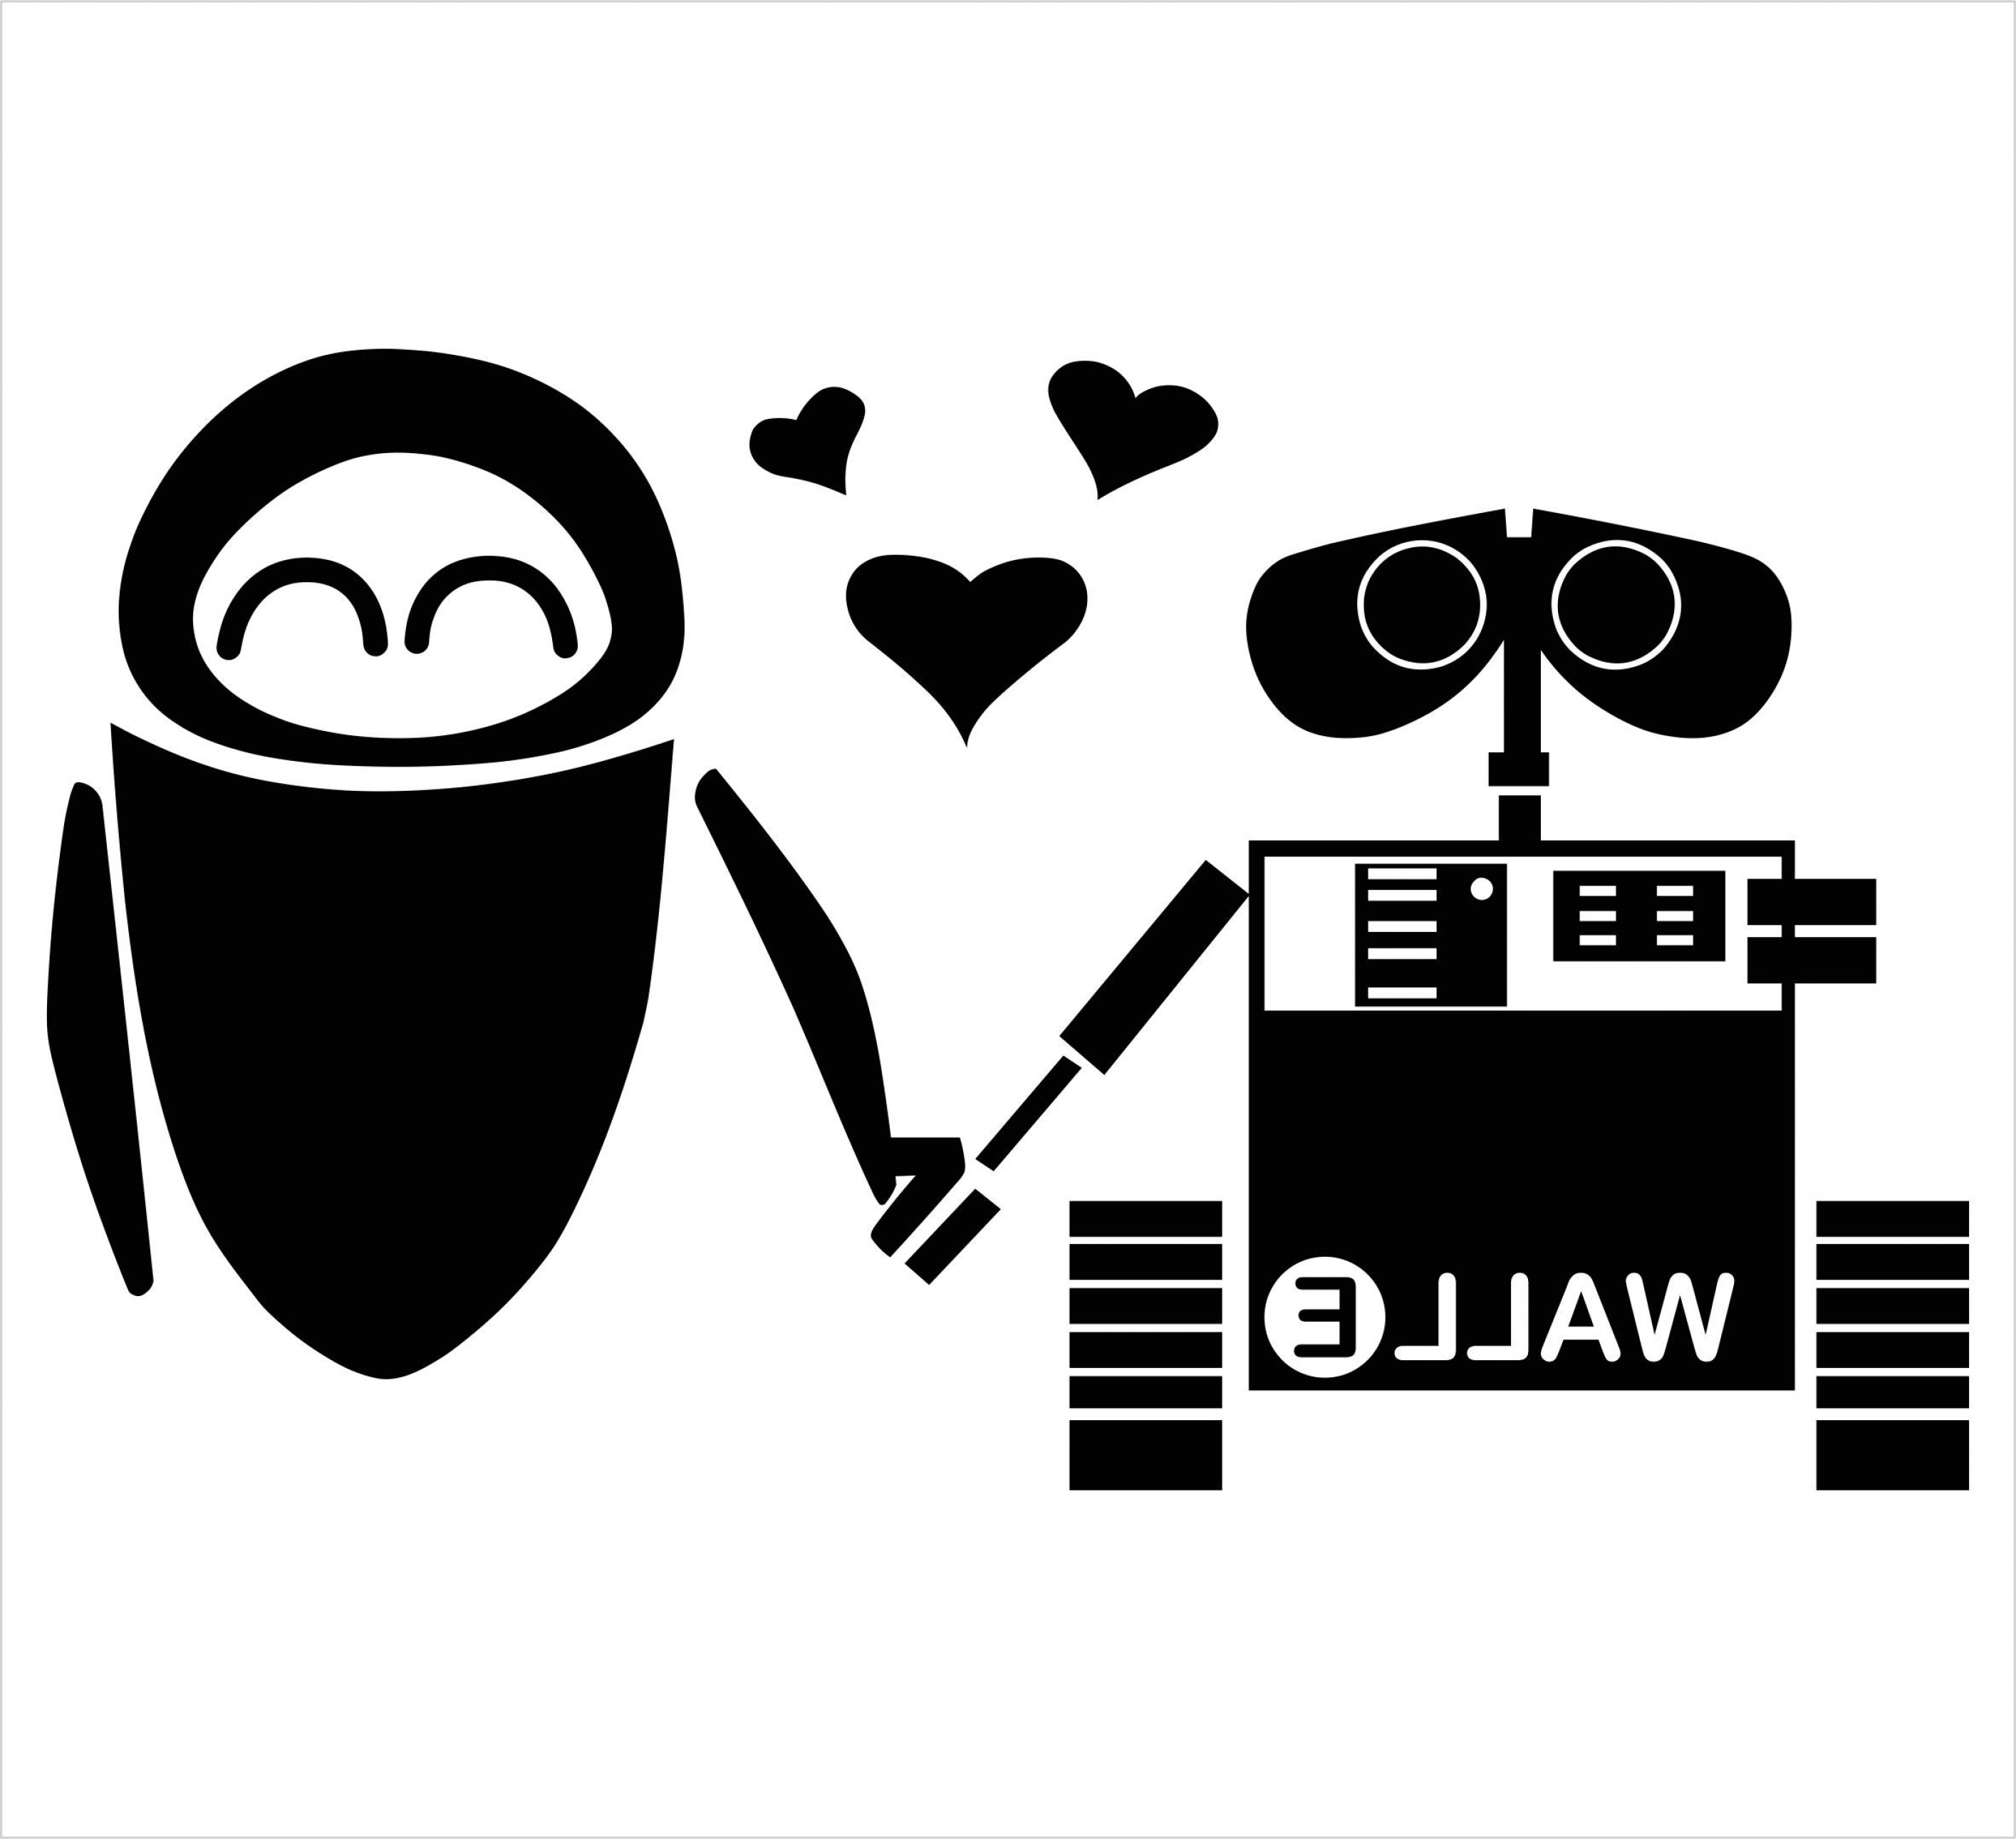 2830x2581 Wall E And Eve Vinyl Decal Sticker Geekchicpro. 